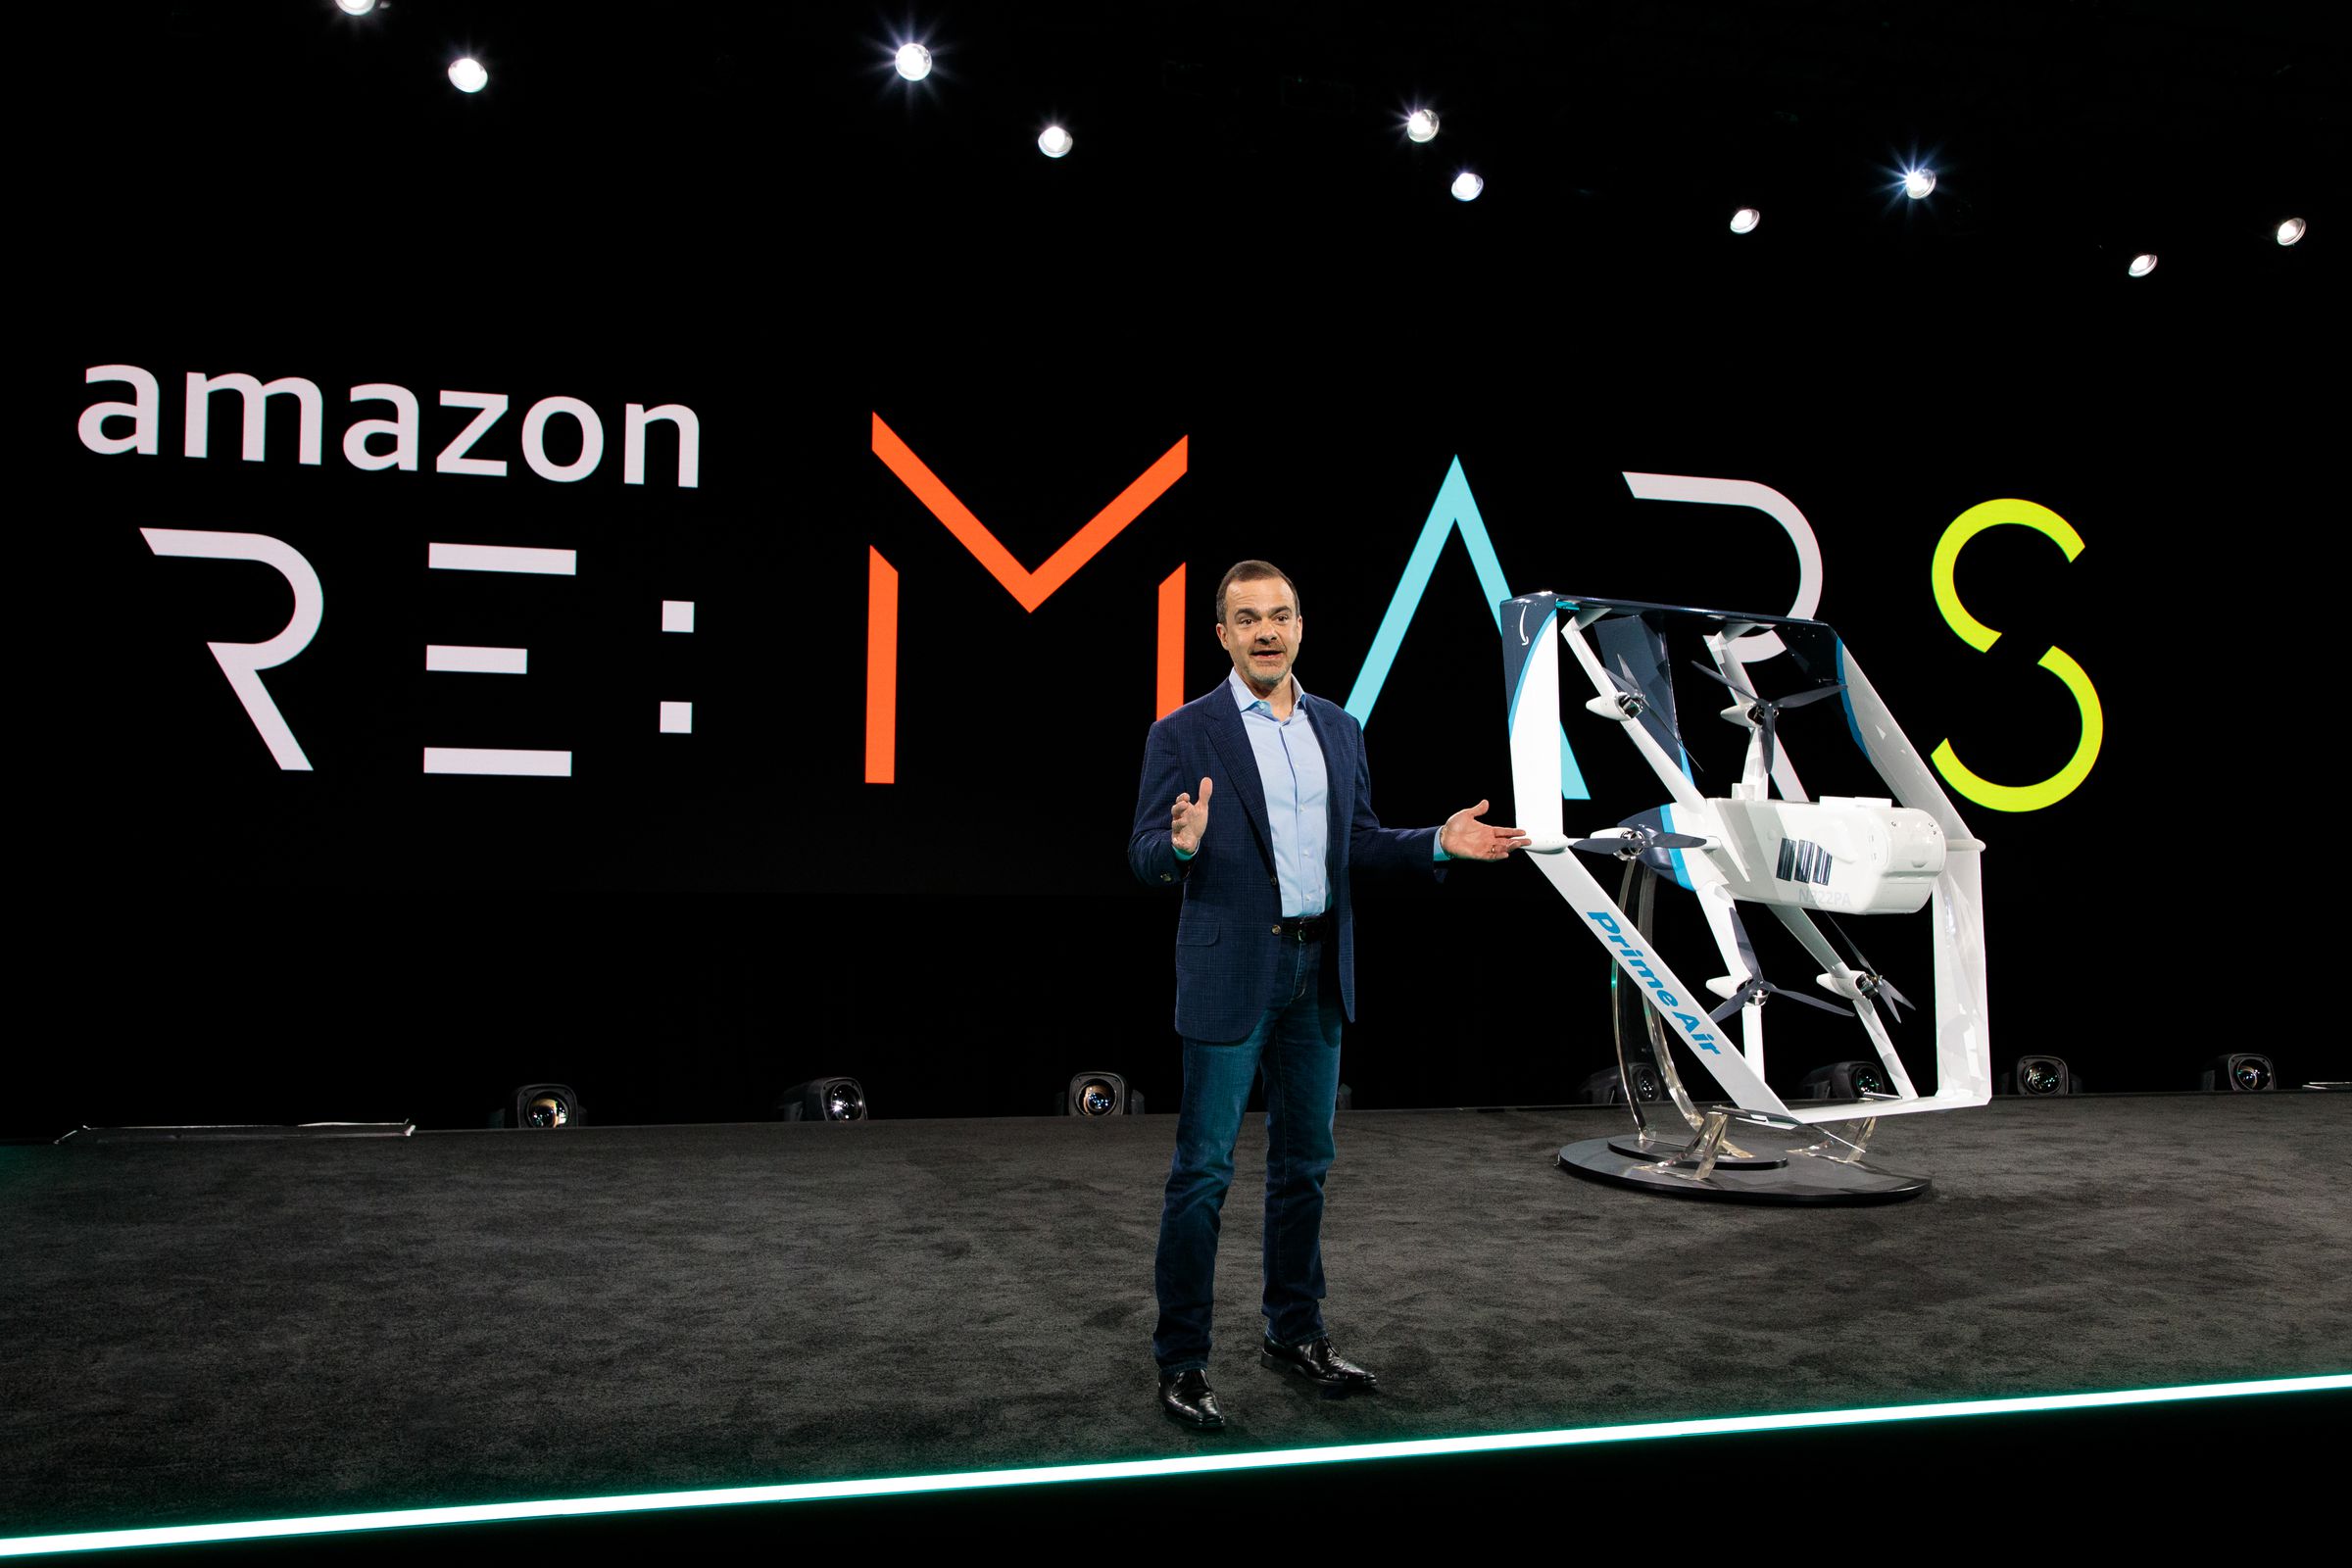 Amazon unveiled the latest version of its drone last year.